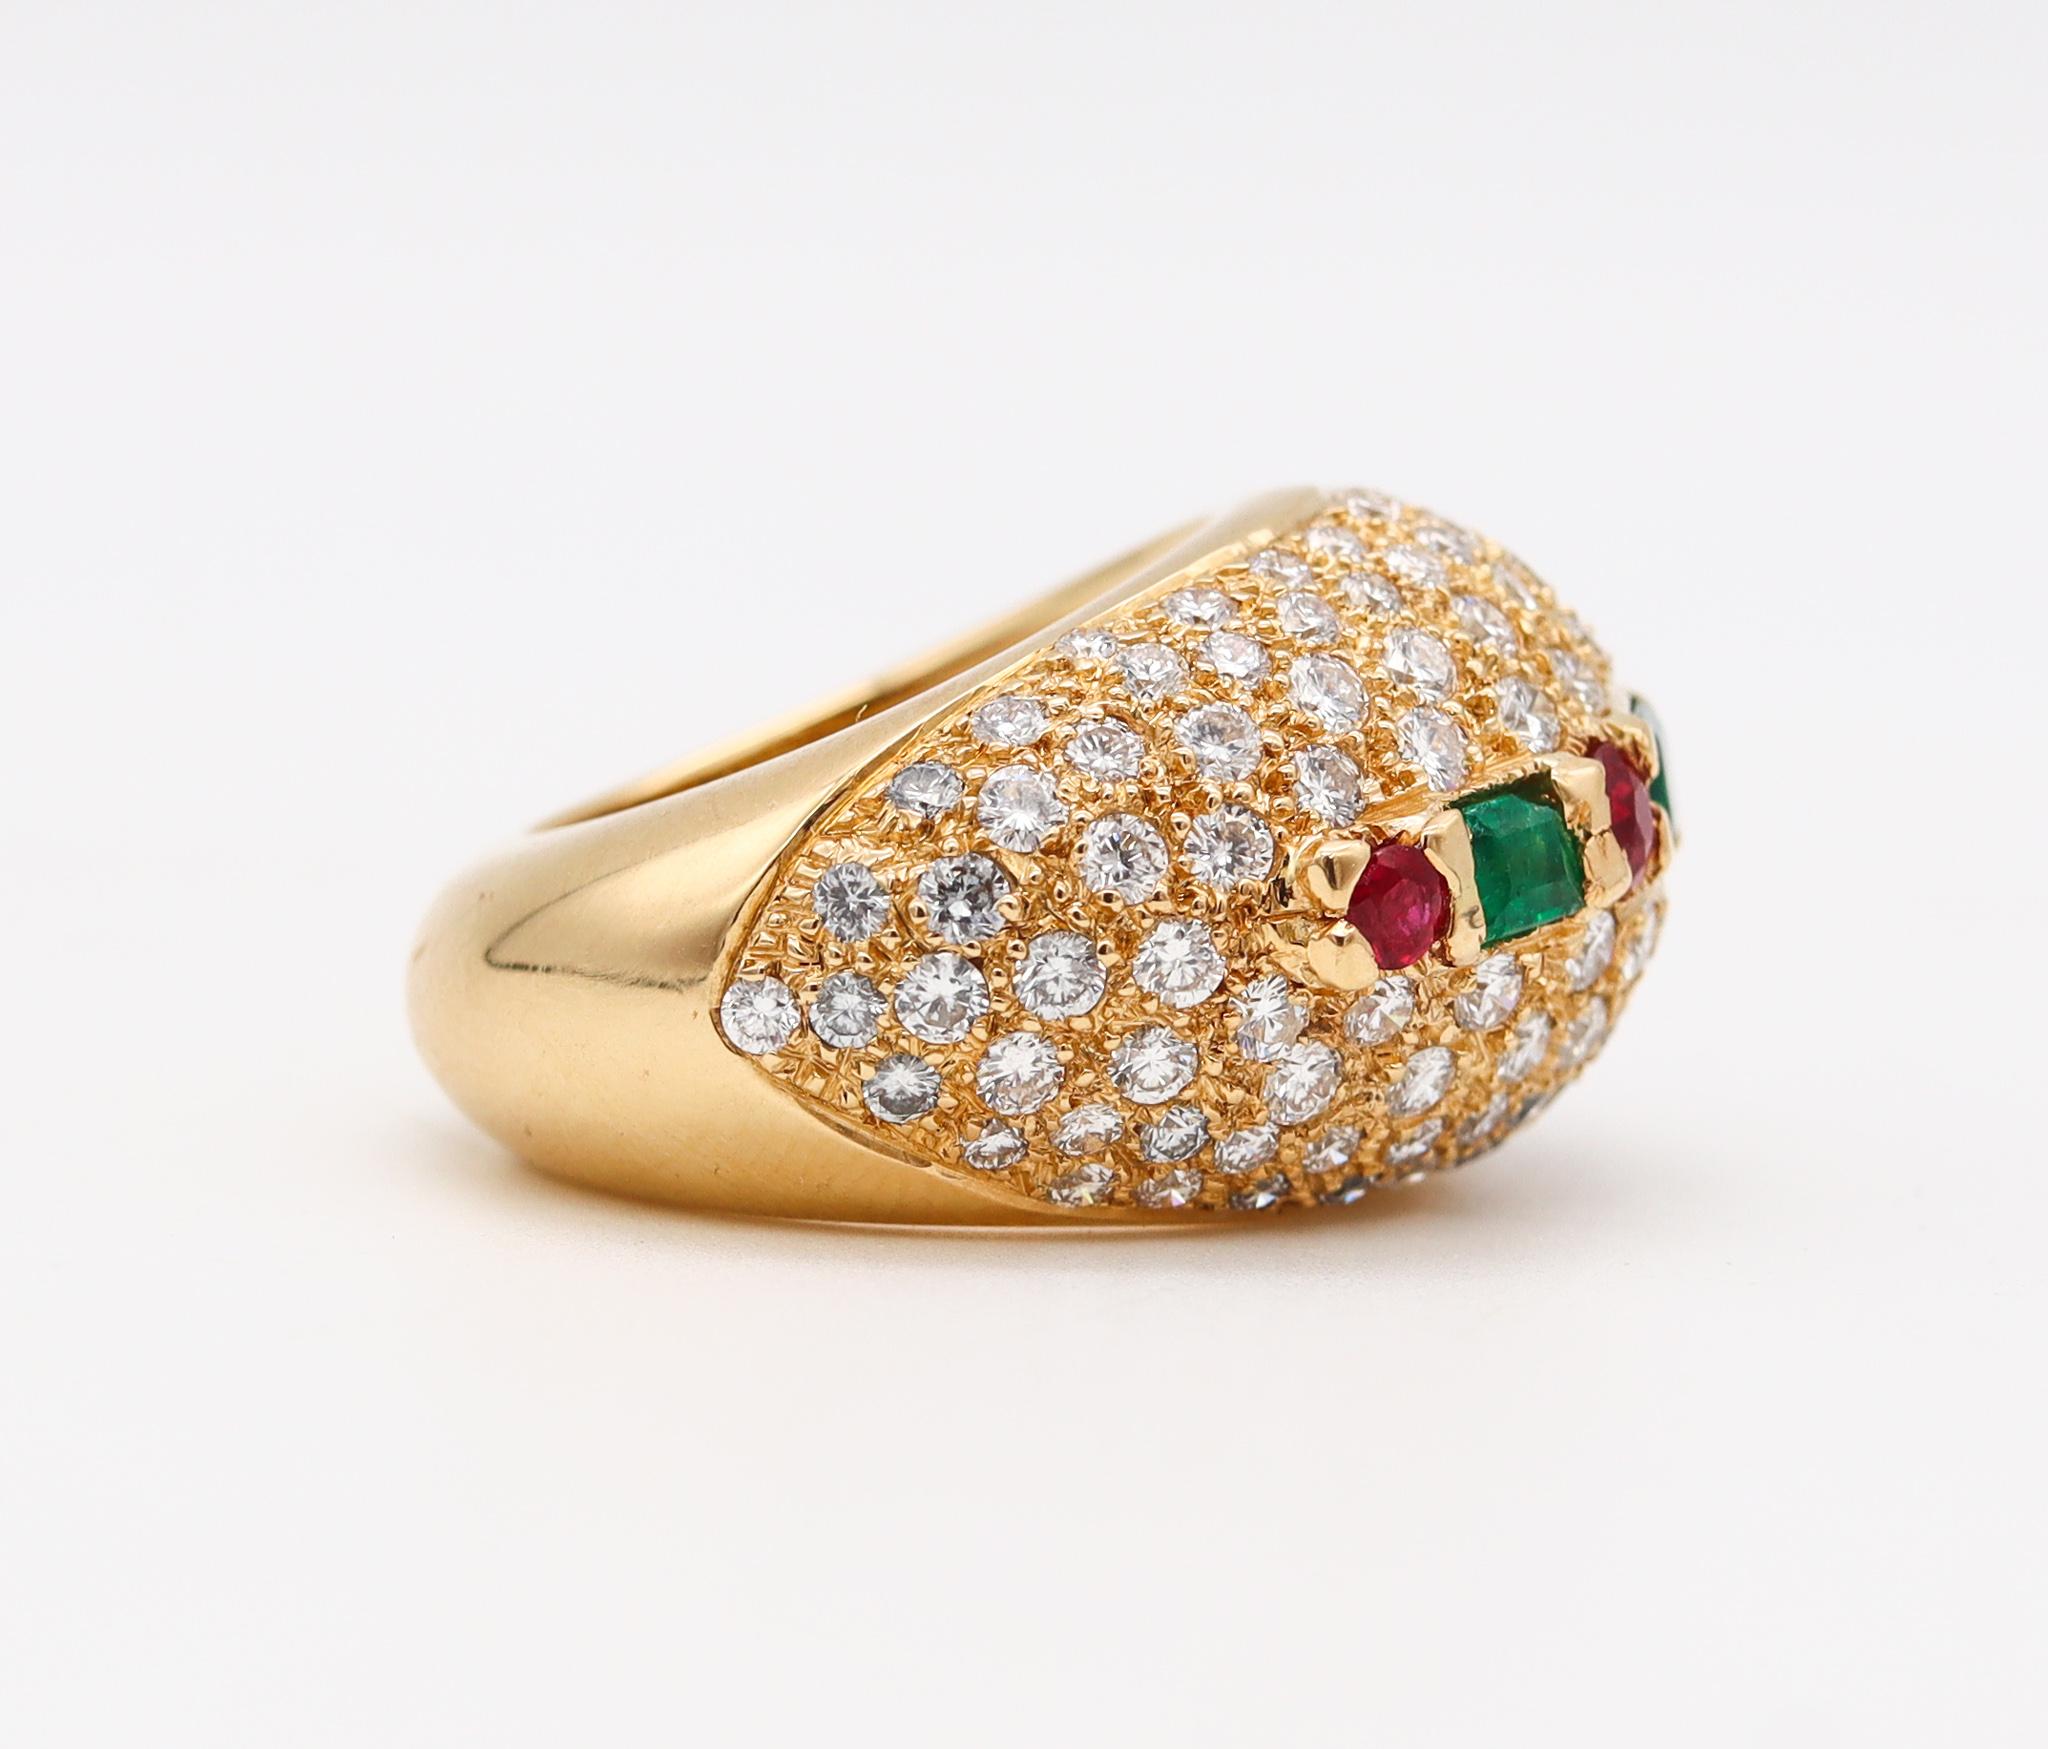 French Modern Cocktail Ring in 18Kt Gold with 7.32 Cts Diamonds Emerald Rubies 1